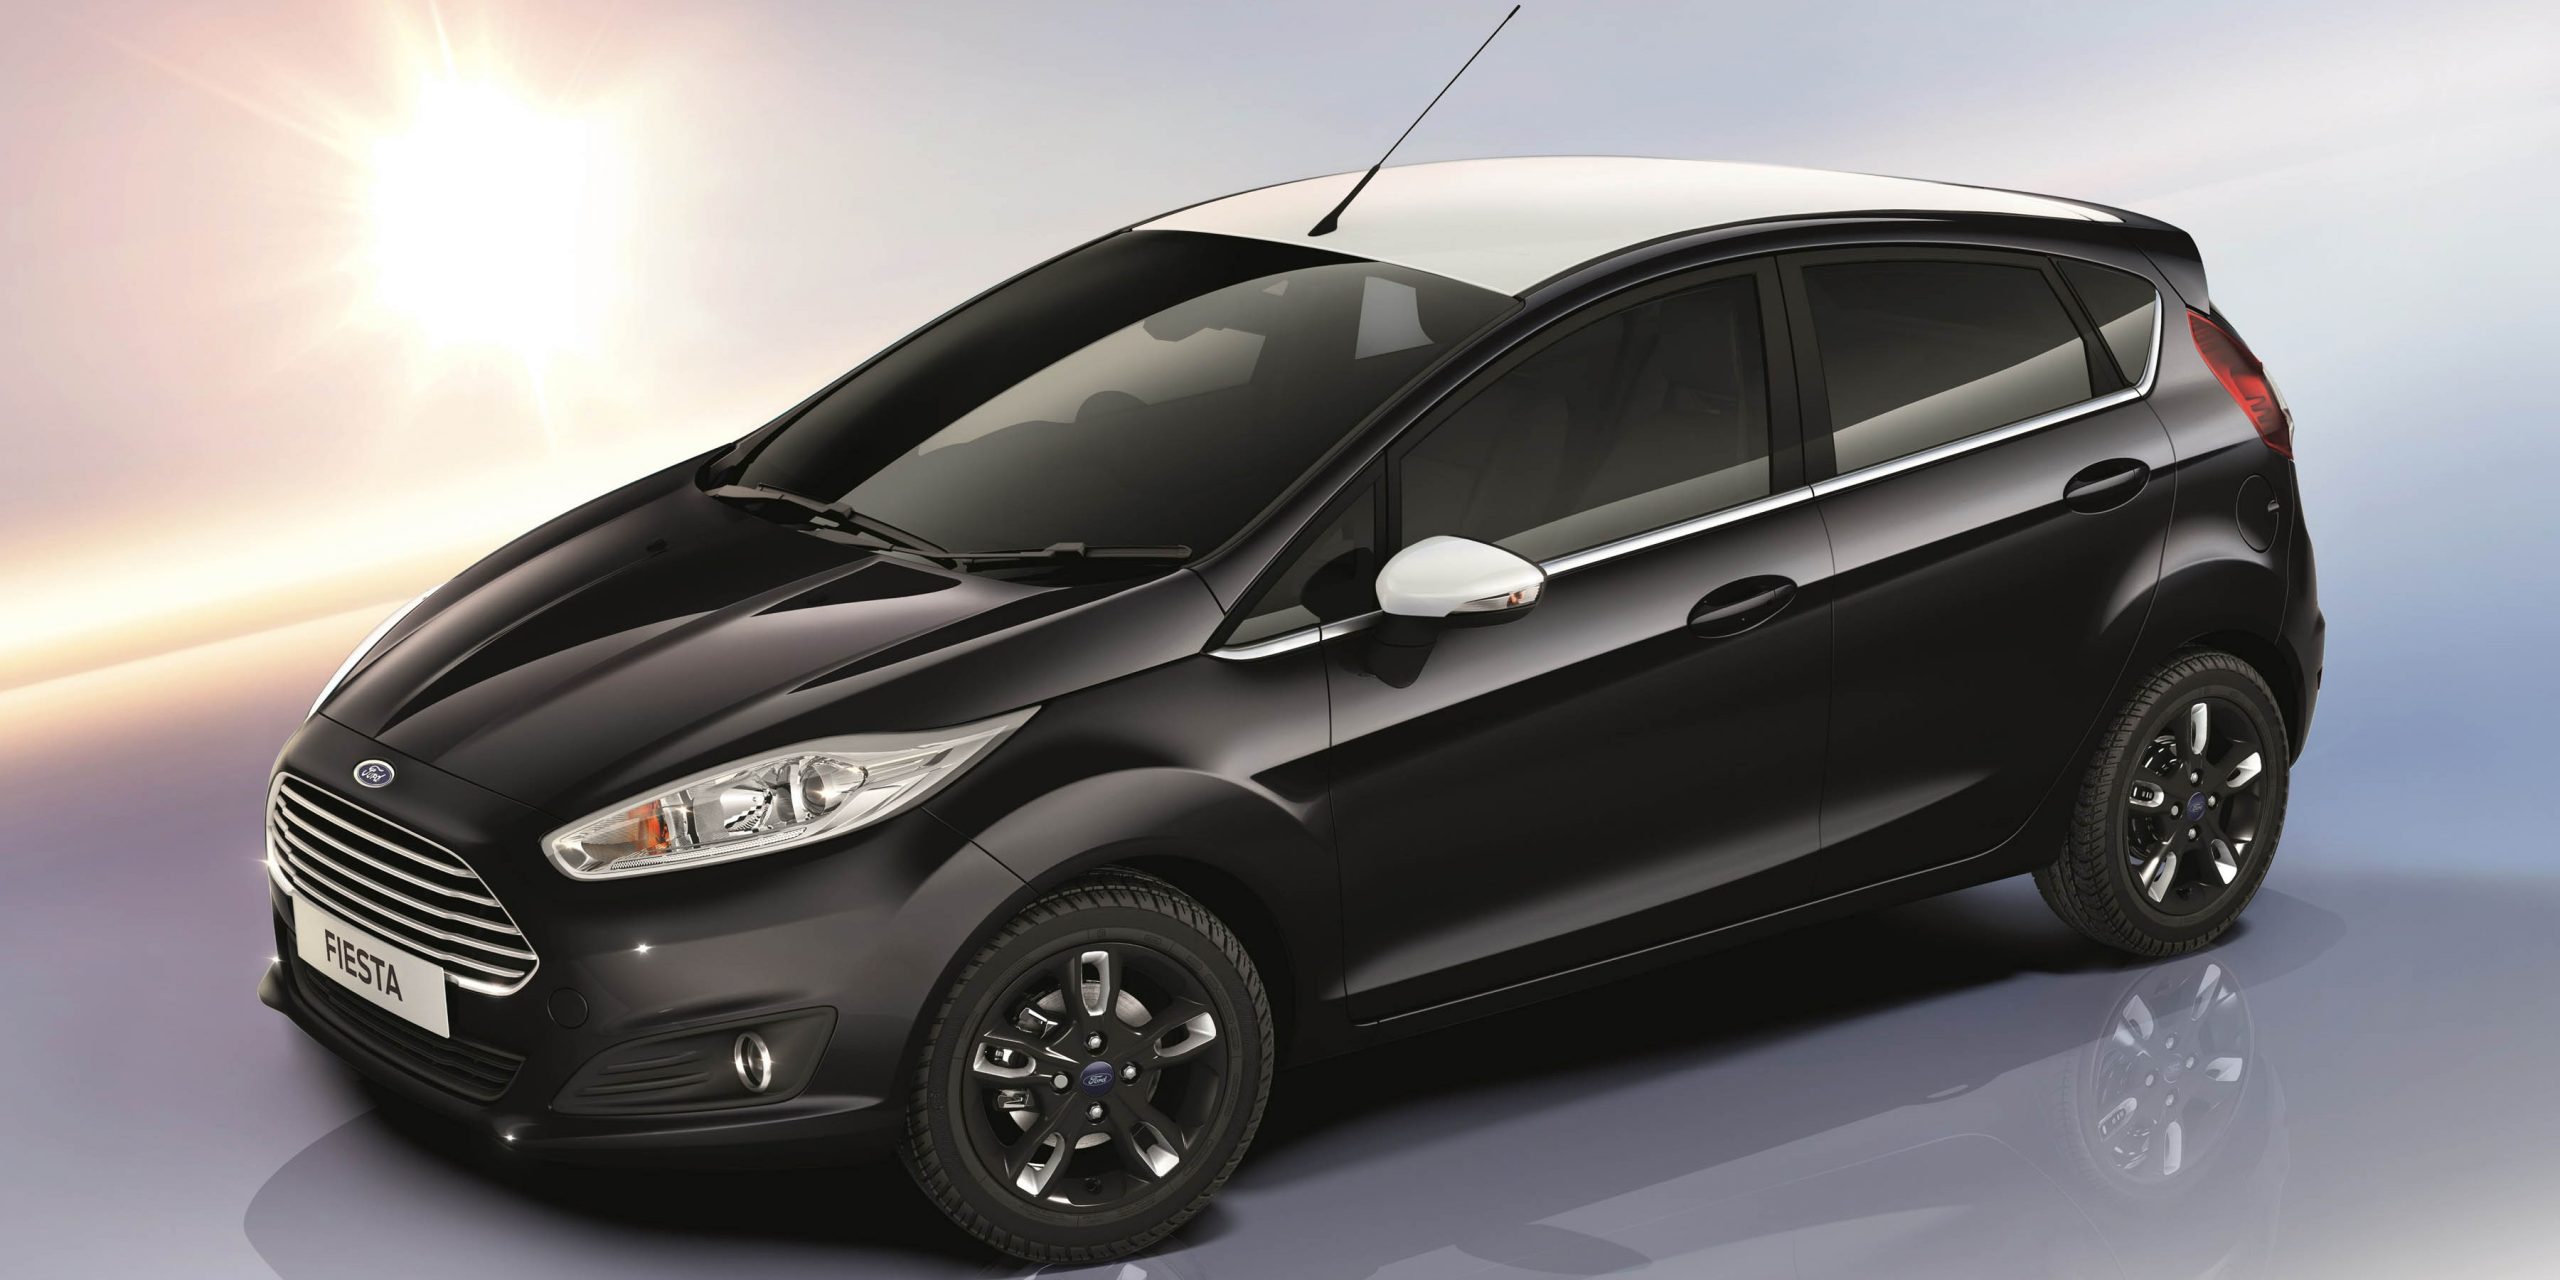 2016 Ford Fiesta Zetec Black, White Editions | Ford Authority